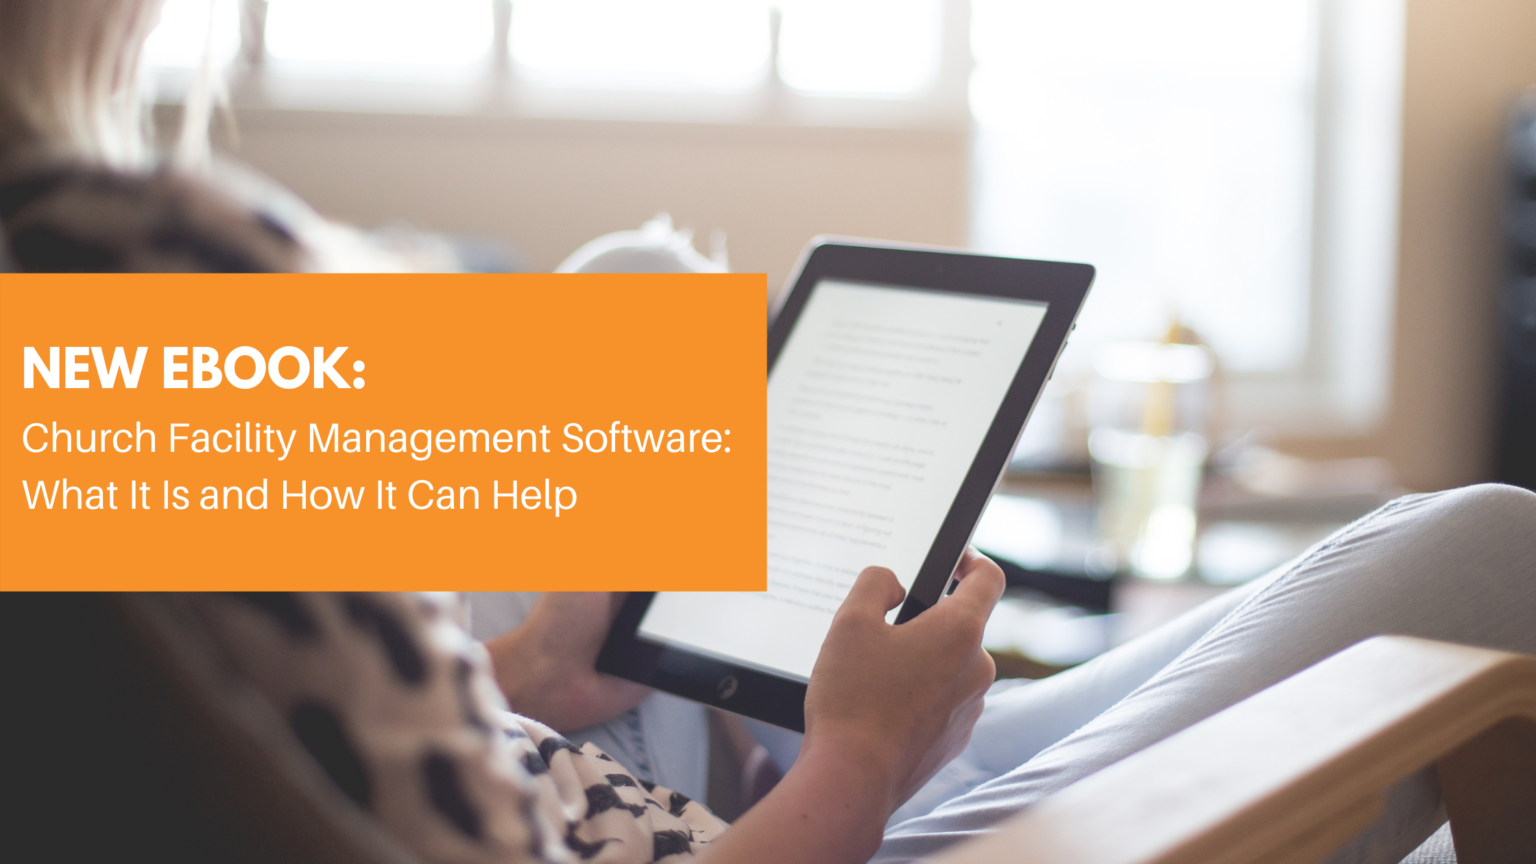 New eBook on Church Facility Management Software Smart Church Solutions